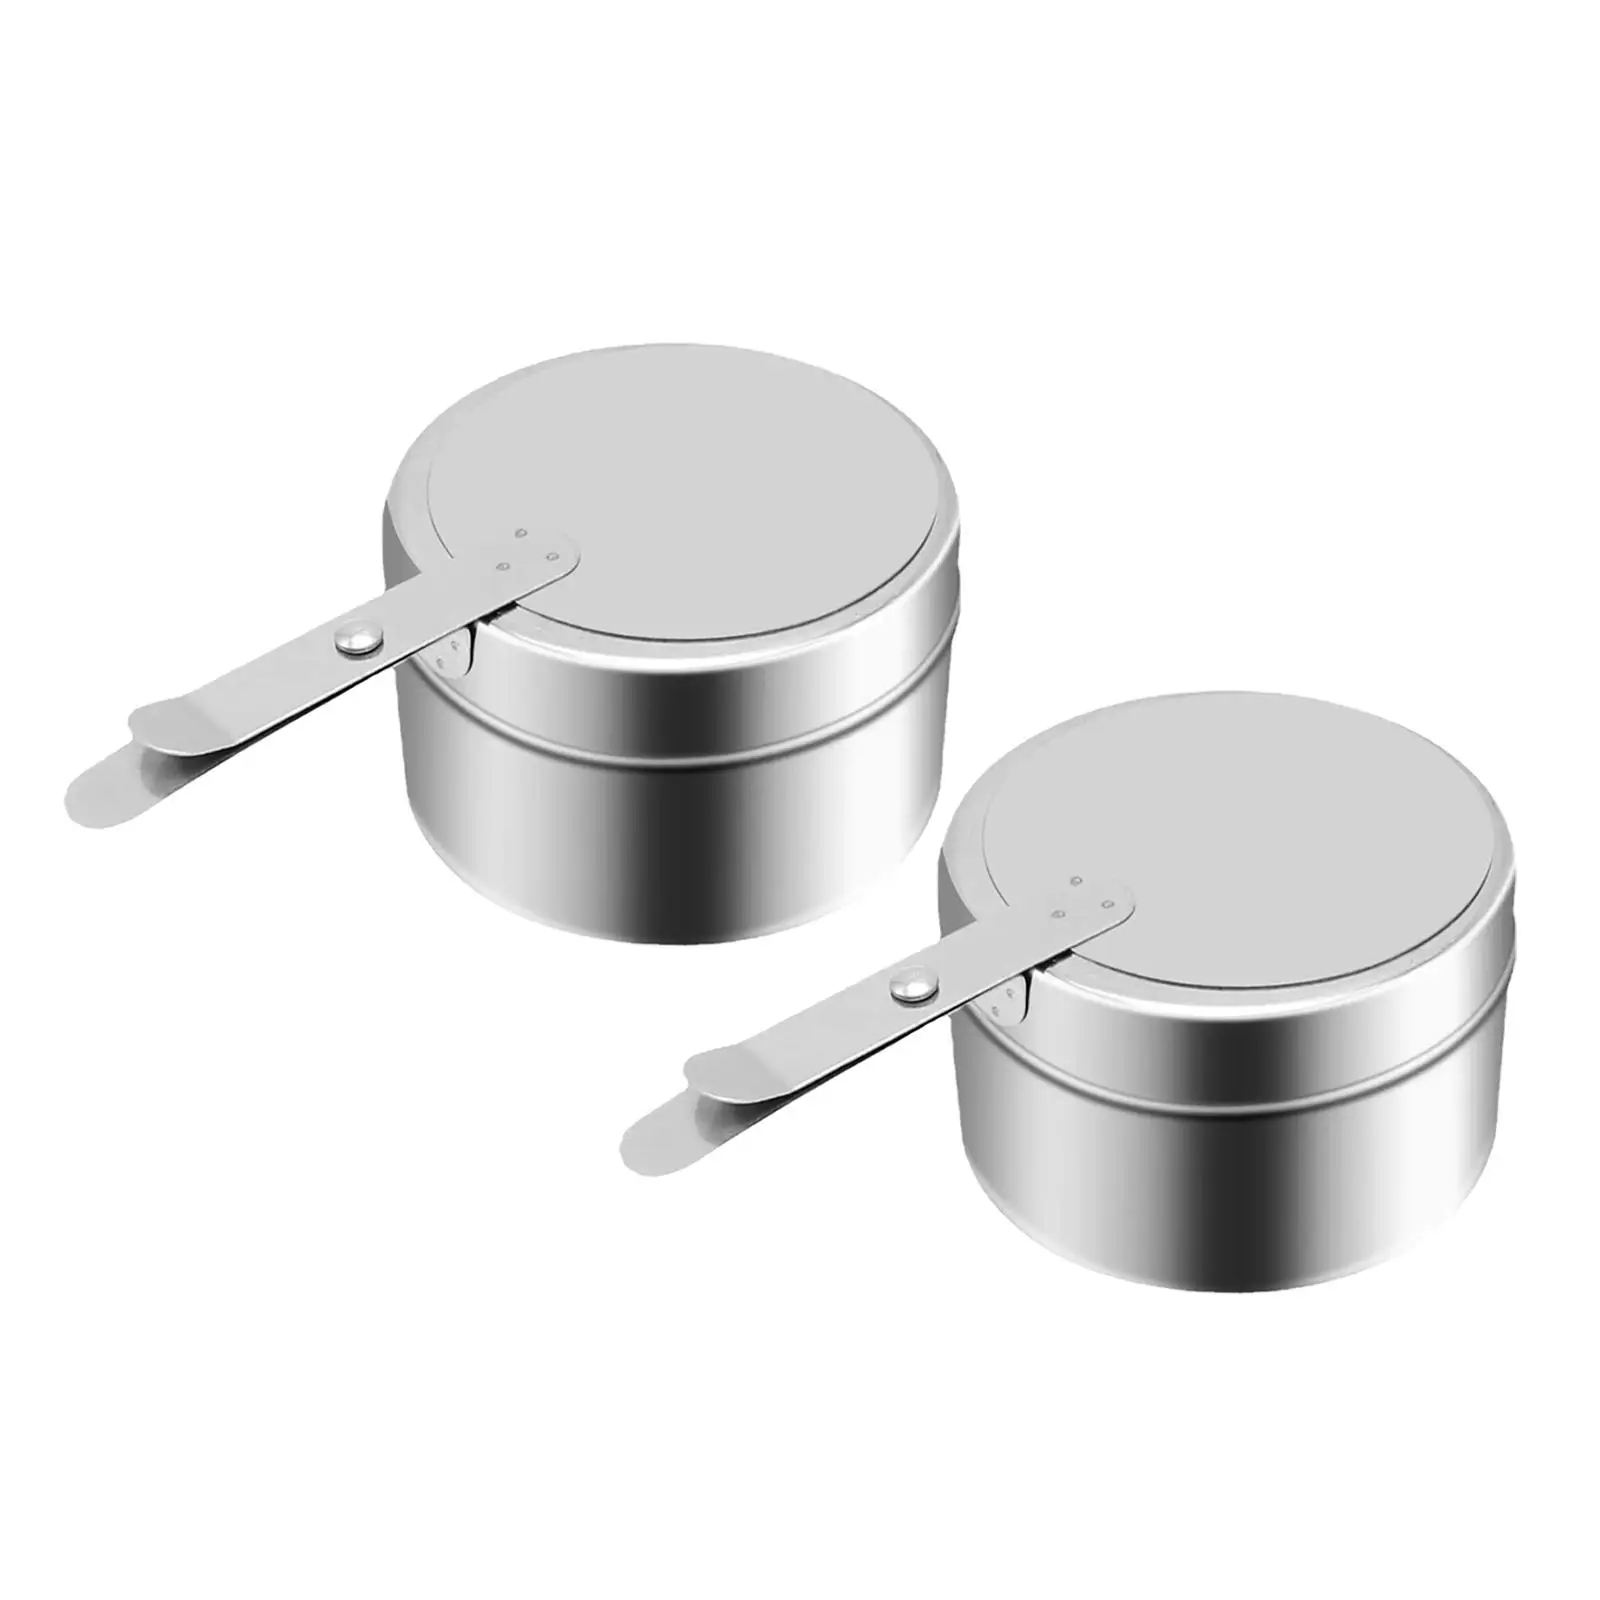 2Pcs Parties Fuel Cans Holder Set Chafer Canned Buffet Warmer Warming Trays for Barbecue Catering Events Buffet Party Supplies